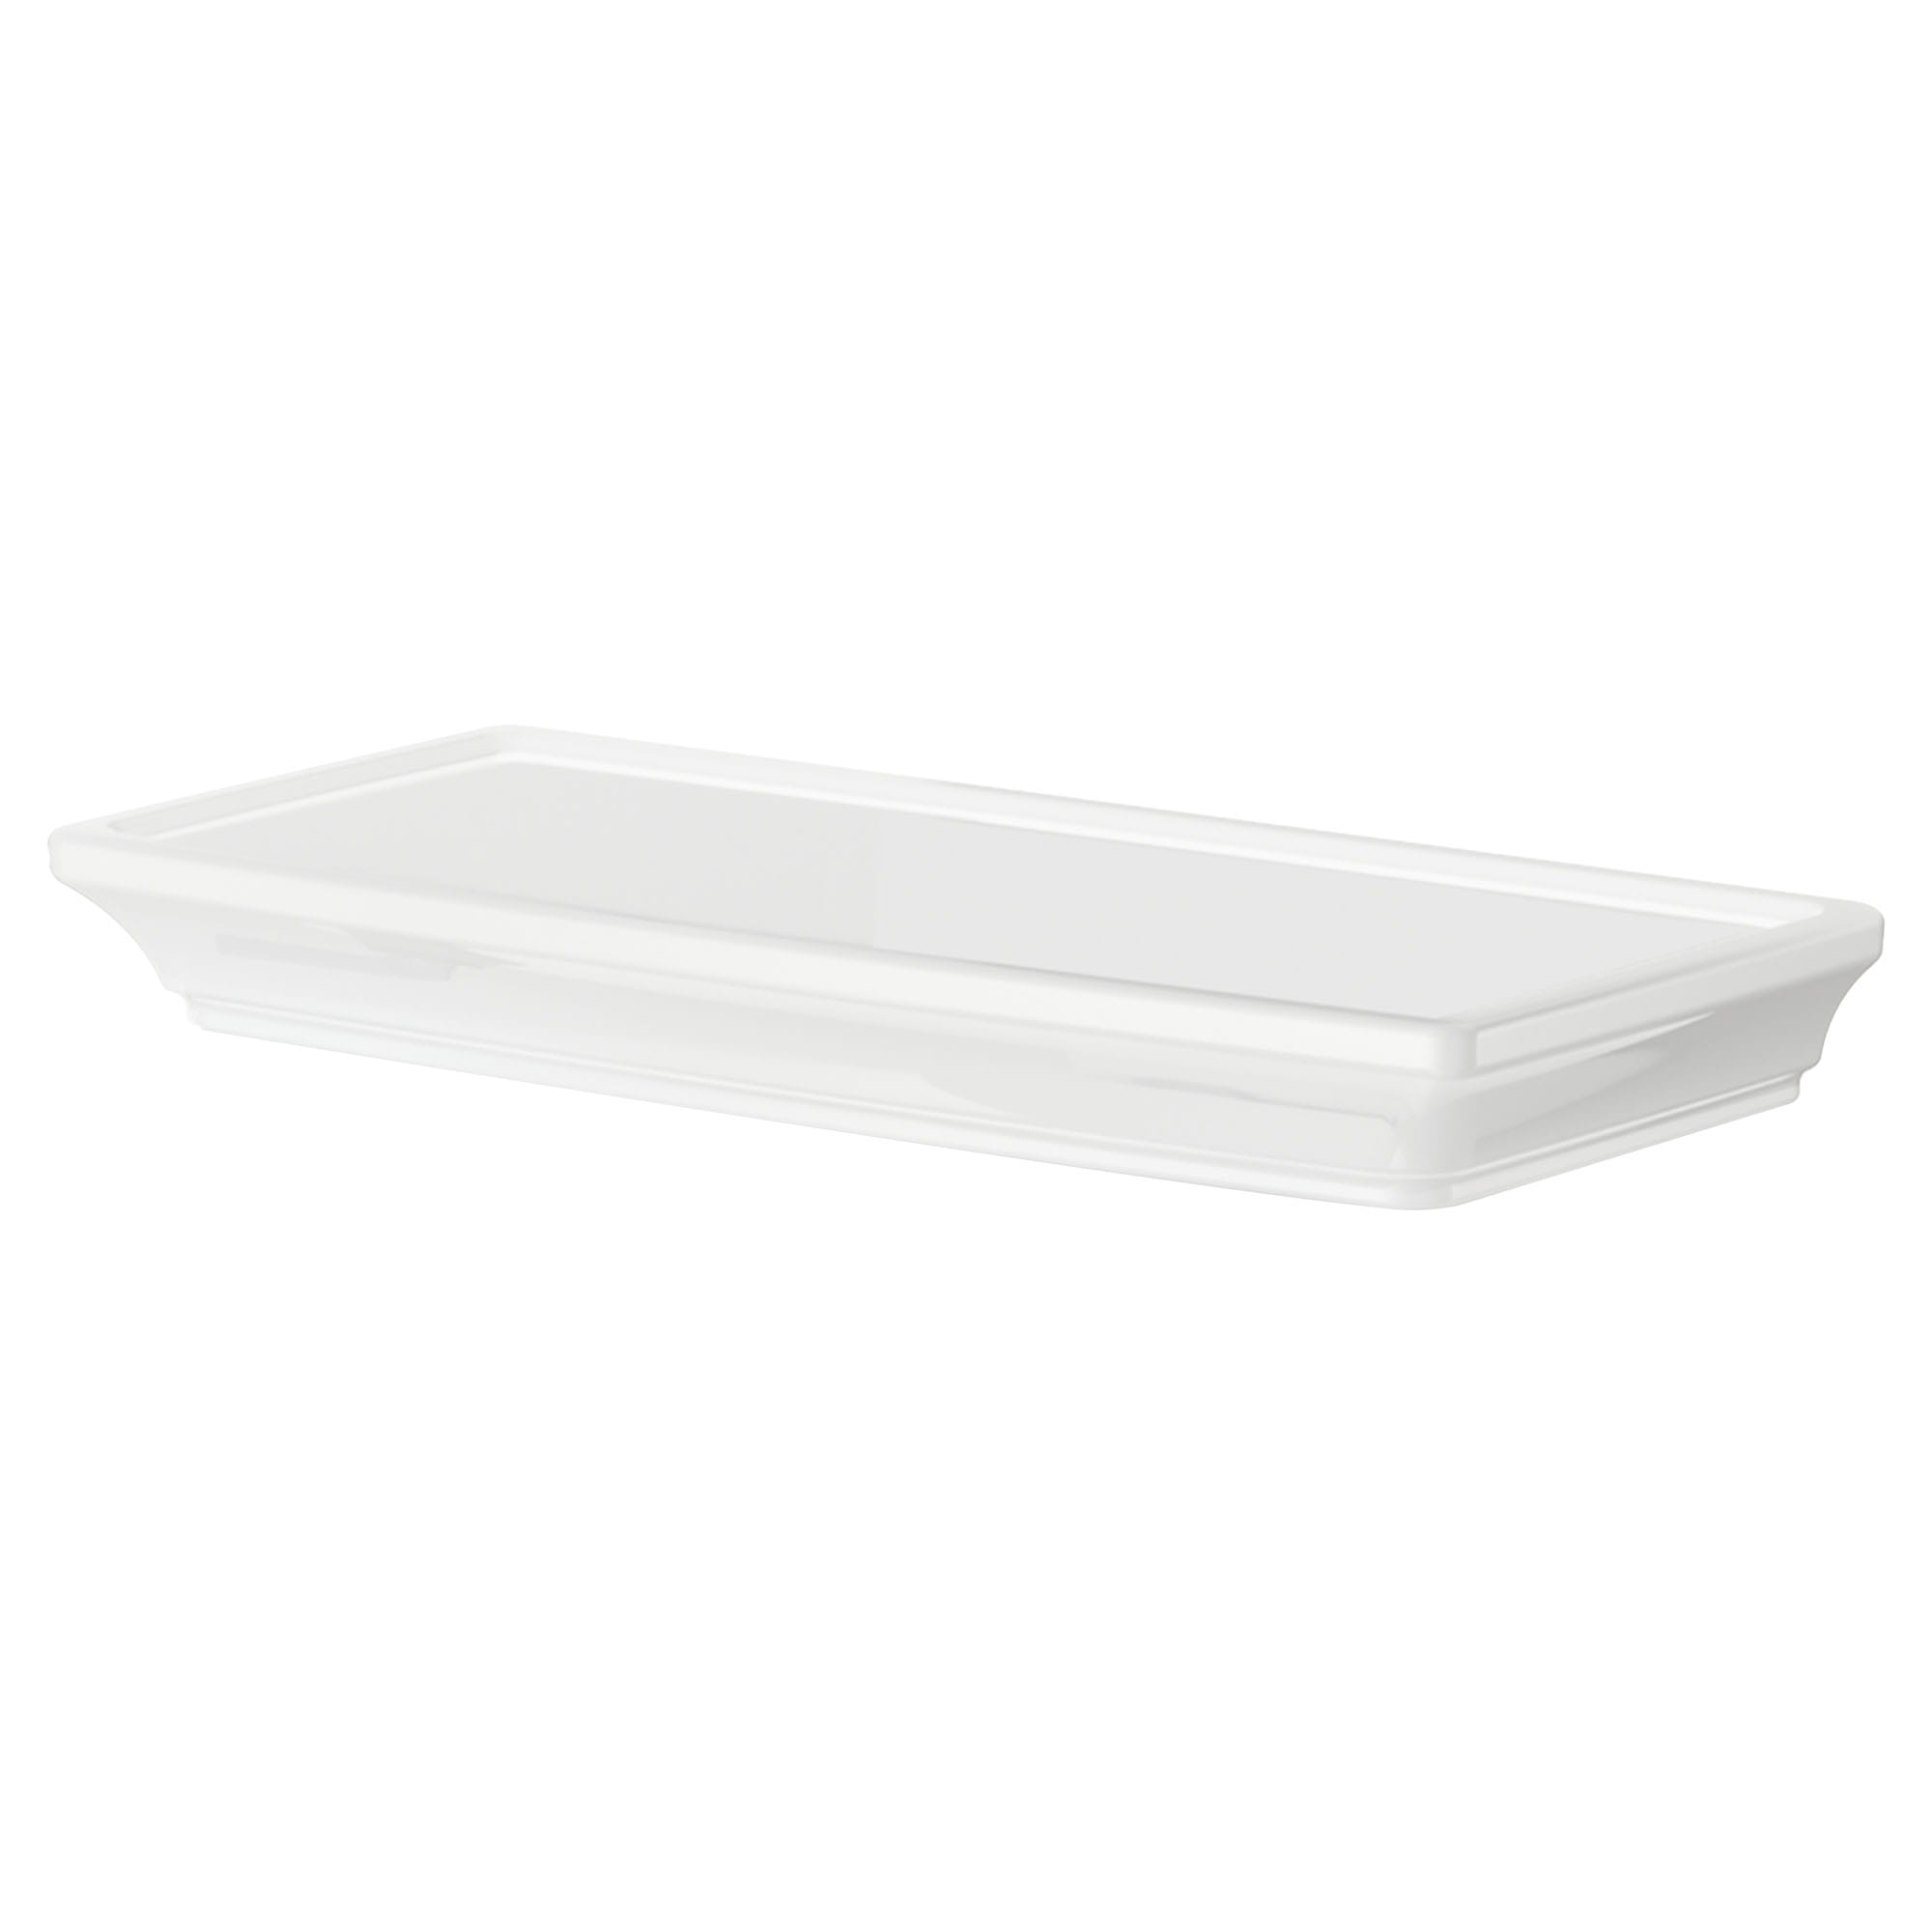 Town Square S 12 Inch Rough Toilet Tank Cover WHITE